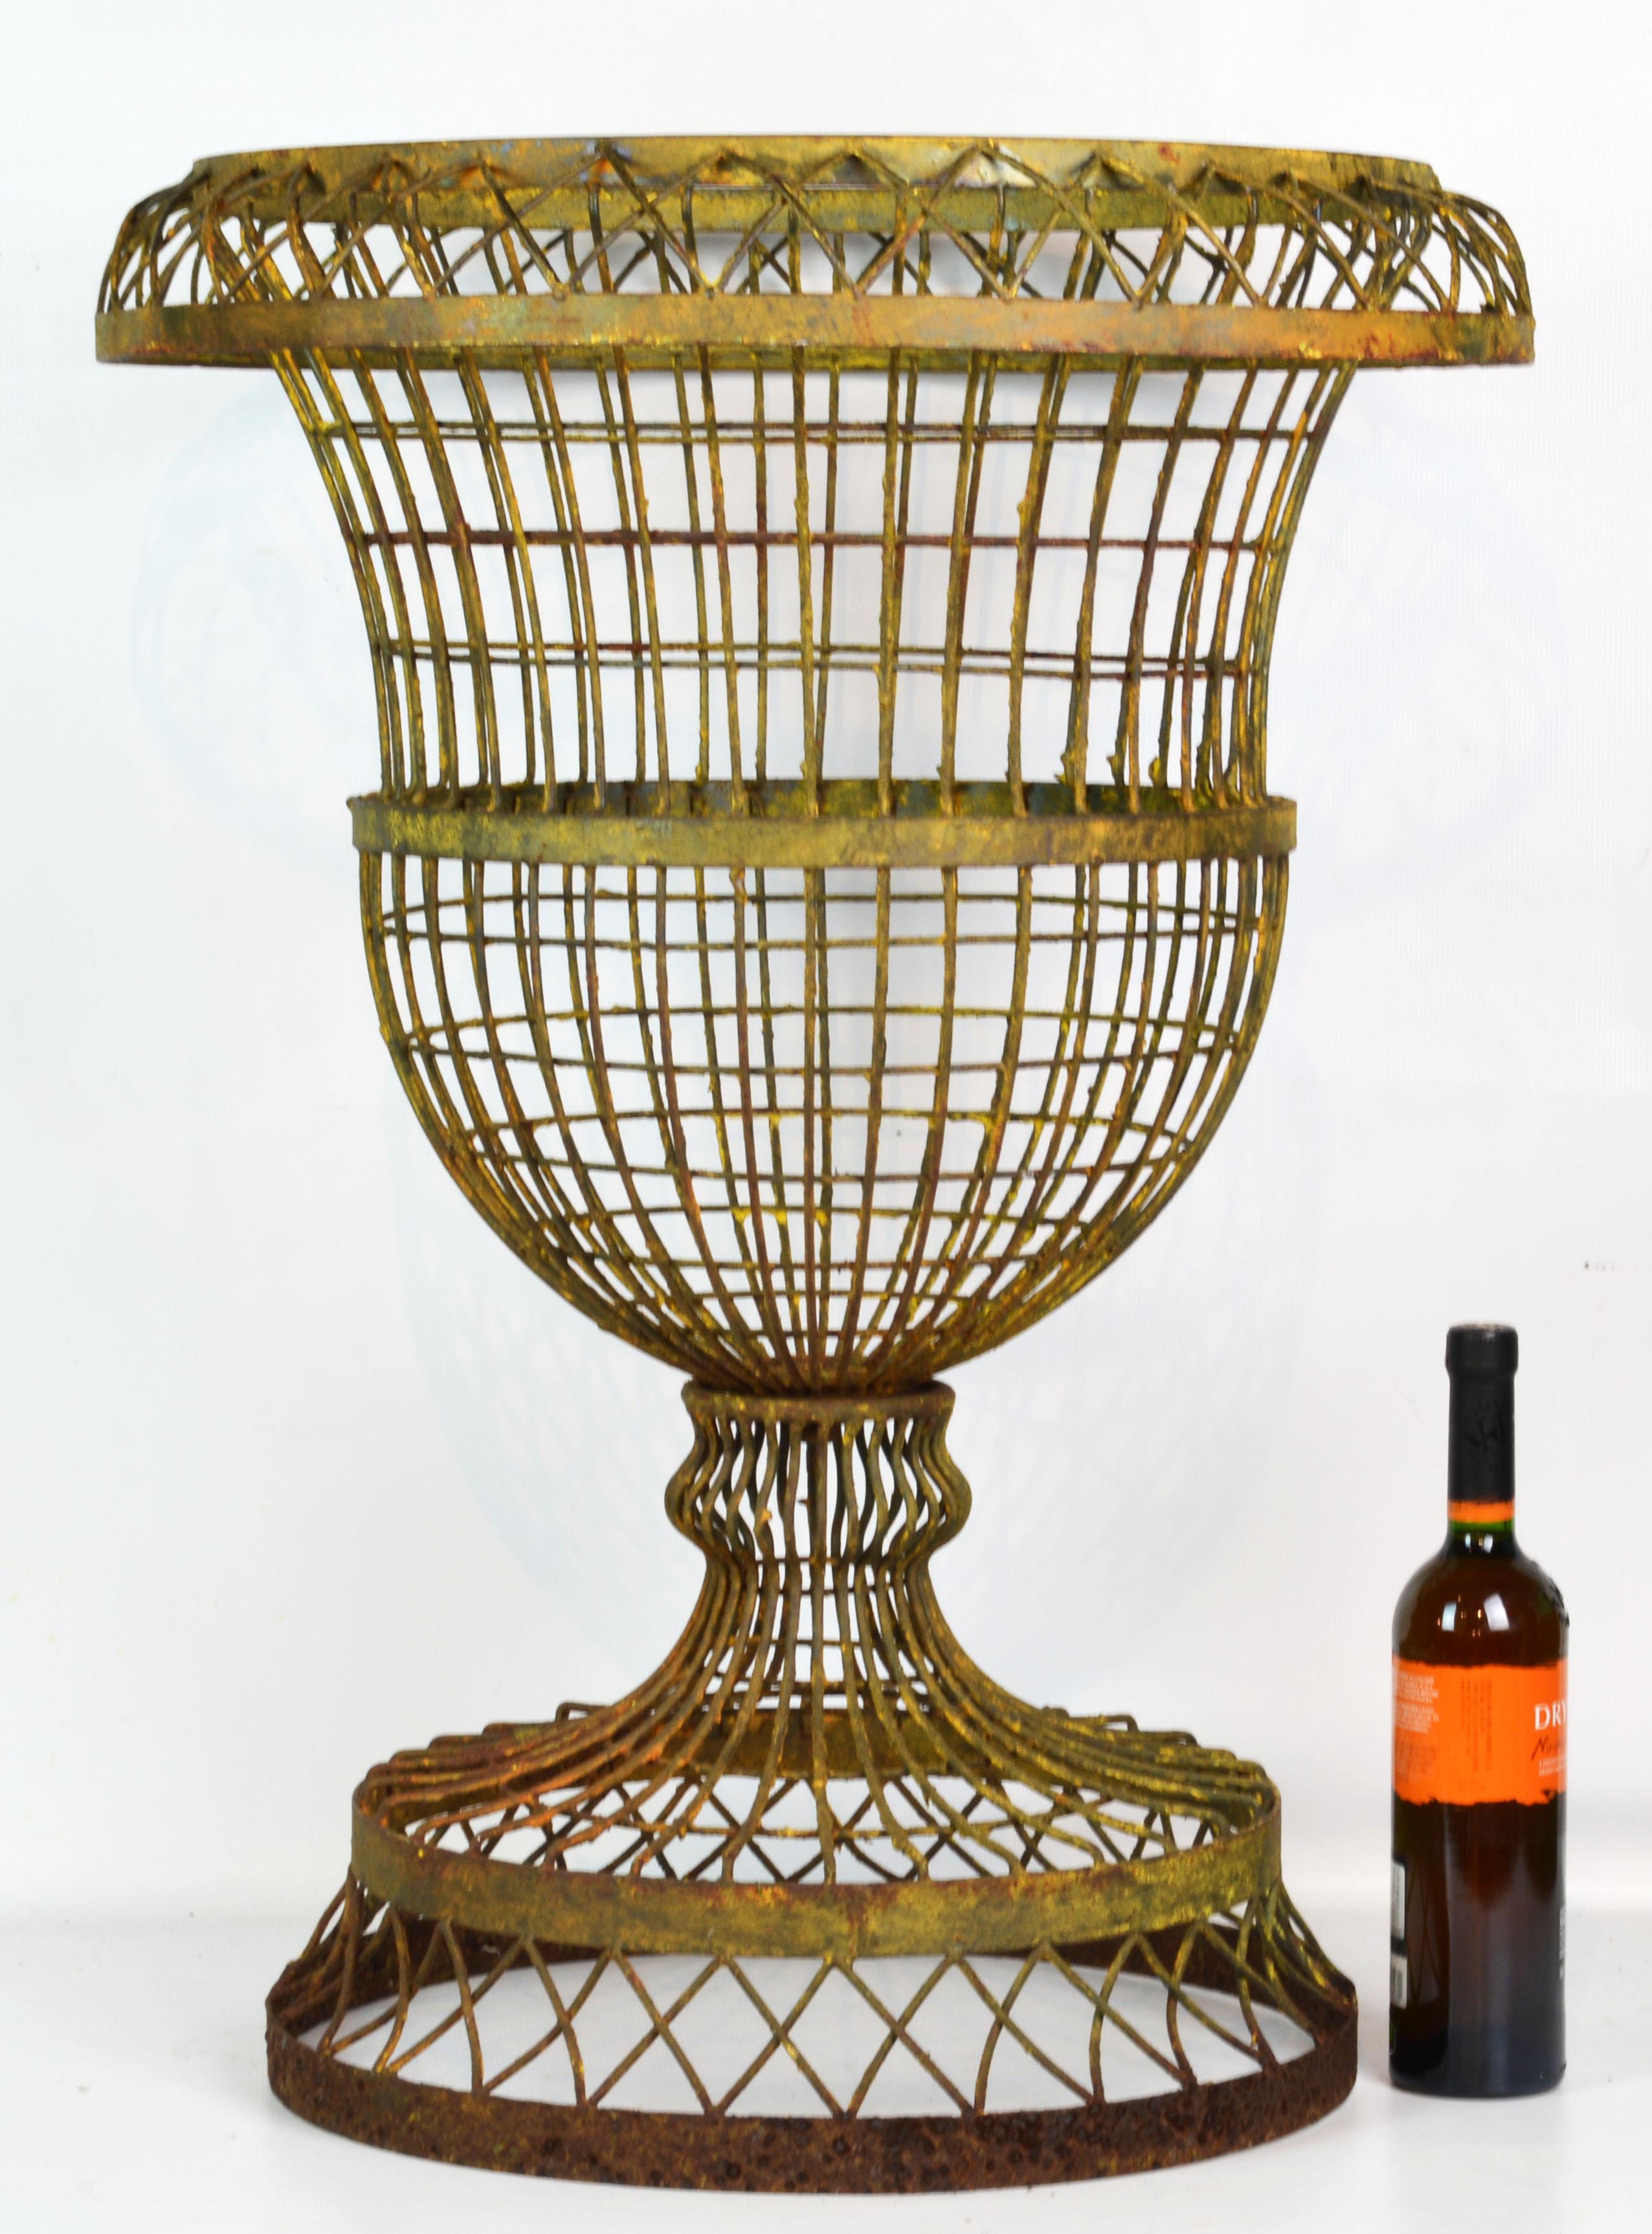 Standing 32 inches tall this French style wire garden urn is spectacular. The urn planter has formerly been painted. The paint has been partially removed leaving the urn with a beautiful distressed look.